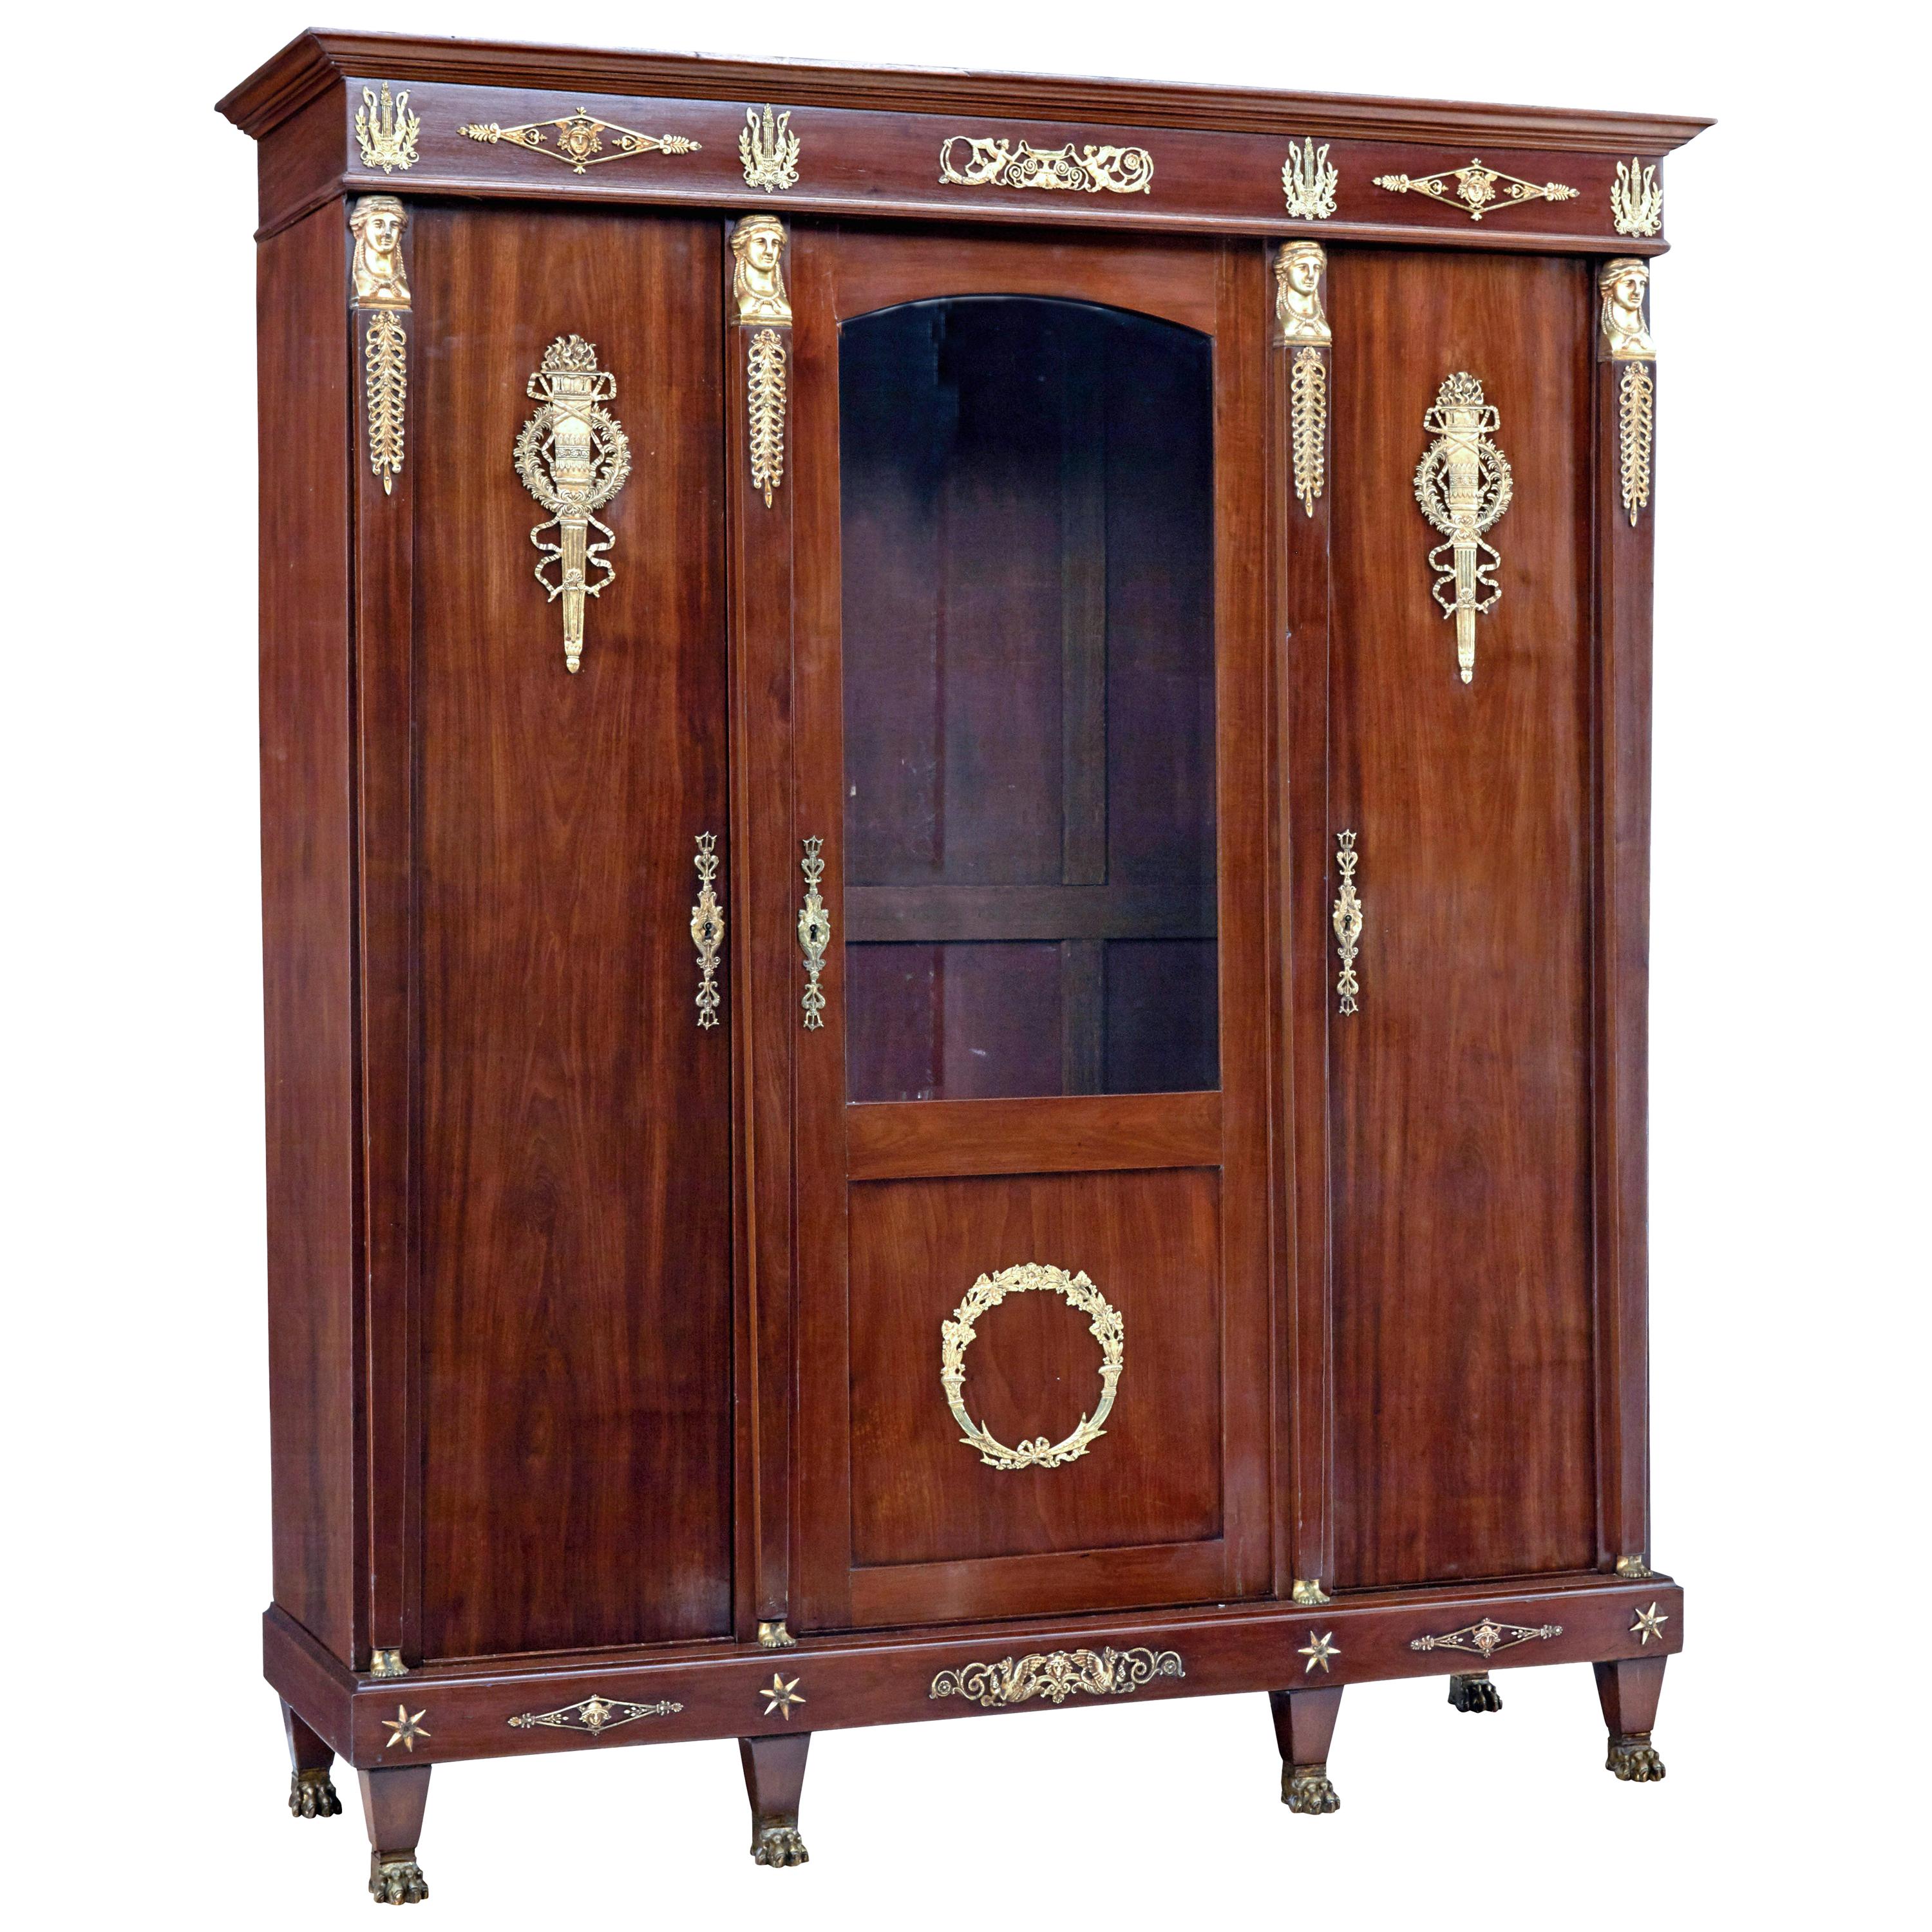 Late 19th Century French Mahogany and Ormolu Armoire